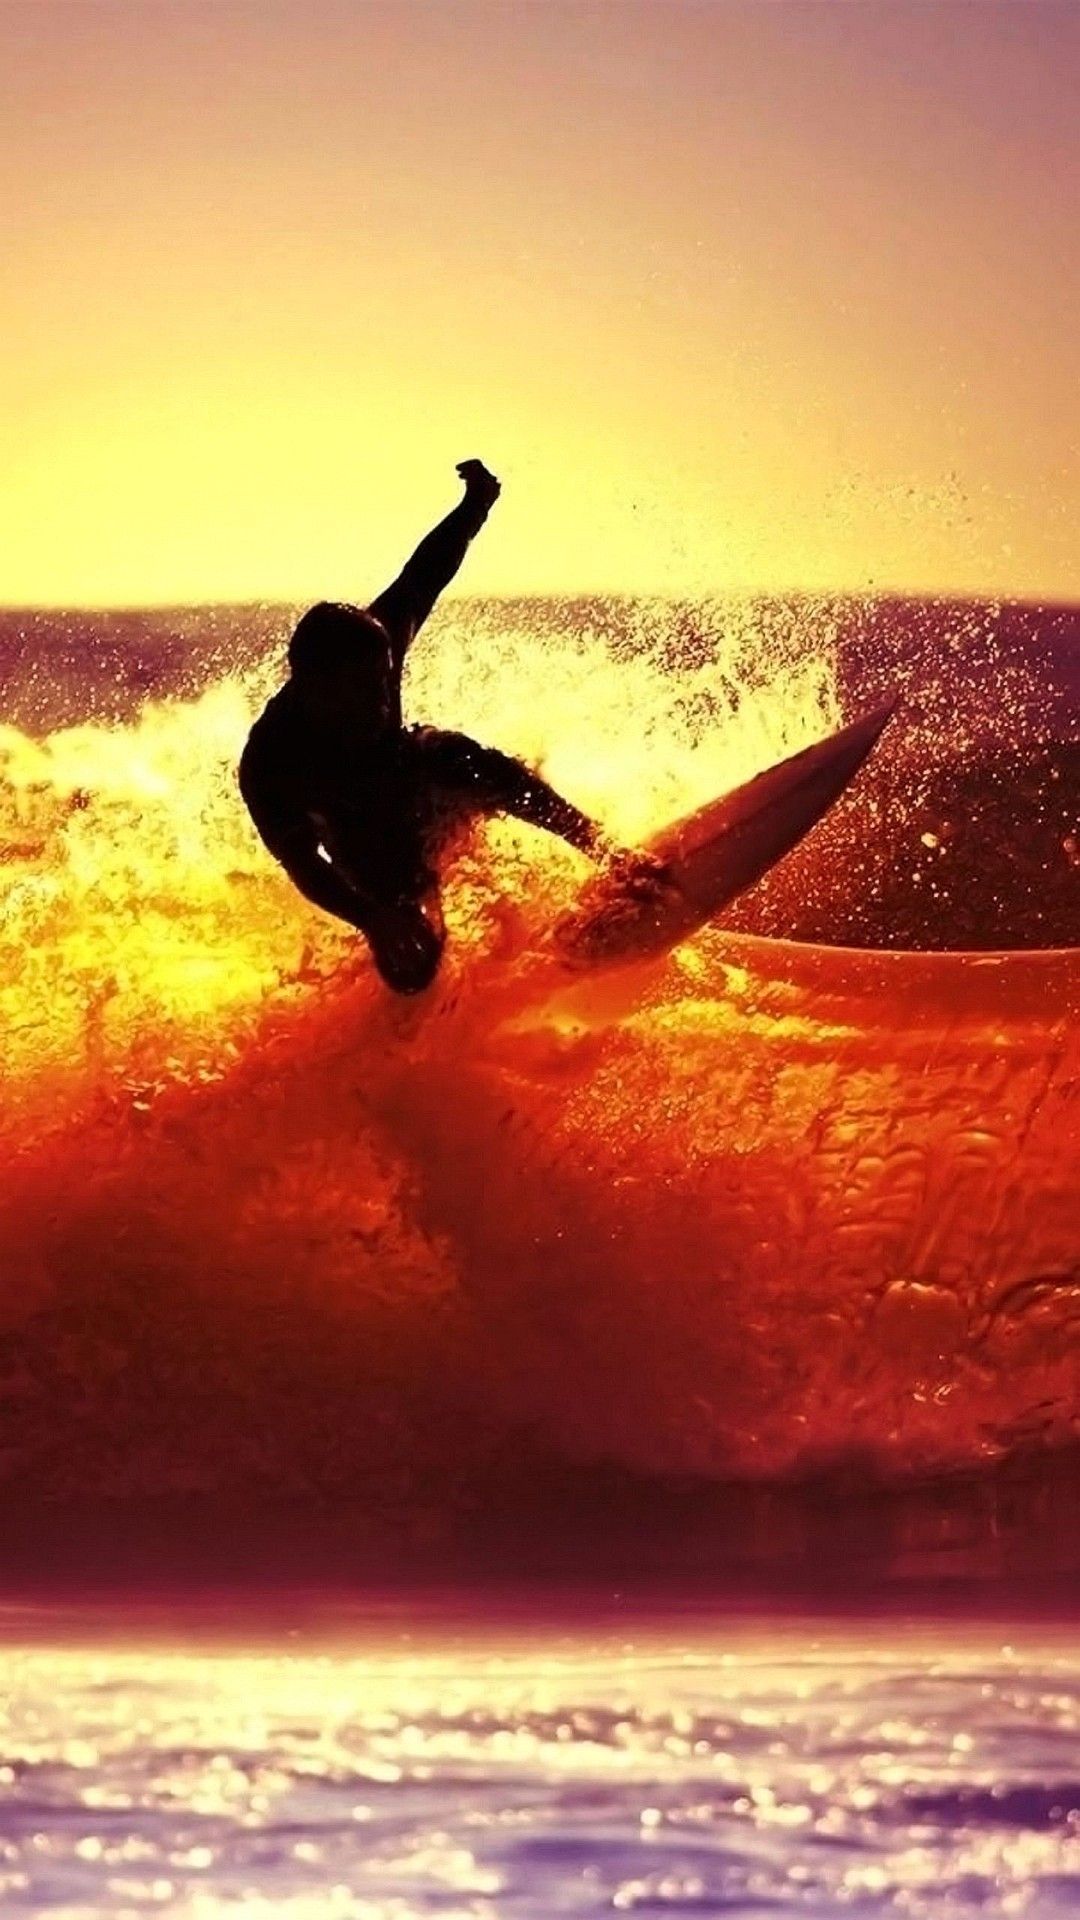 Wallpaper Iphone 6 Plus Surfer 5 5 Inches - 1080 x 1920 - Iphone 6